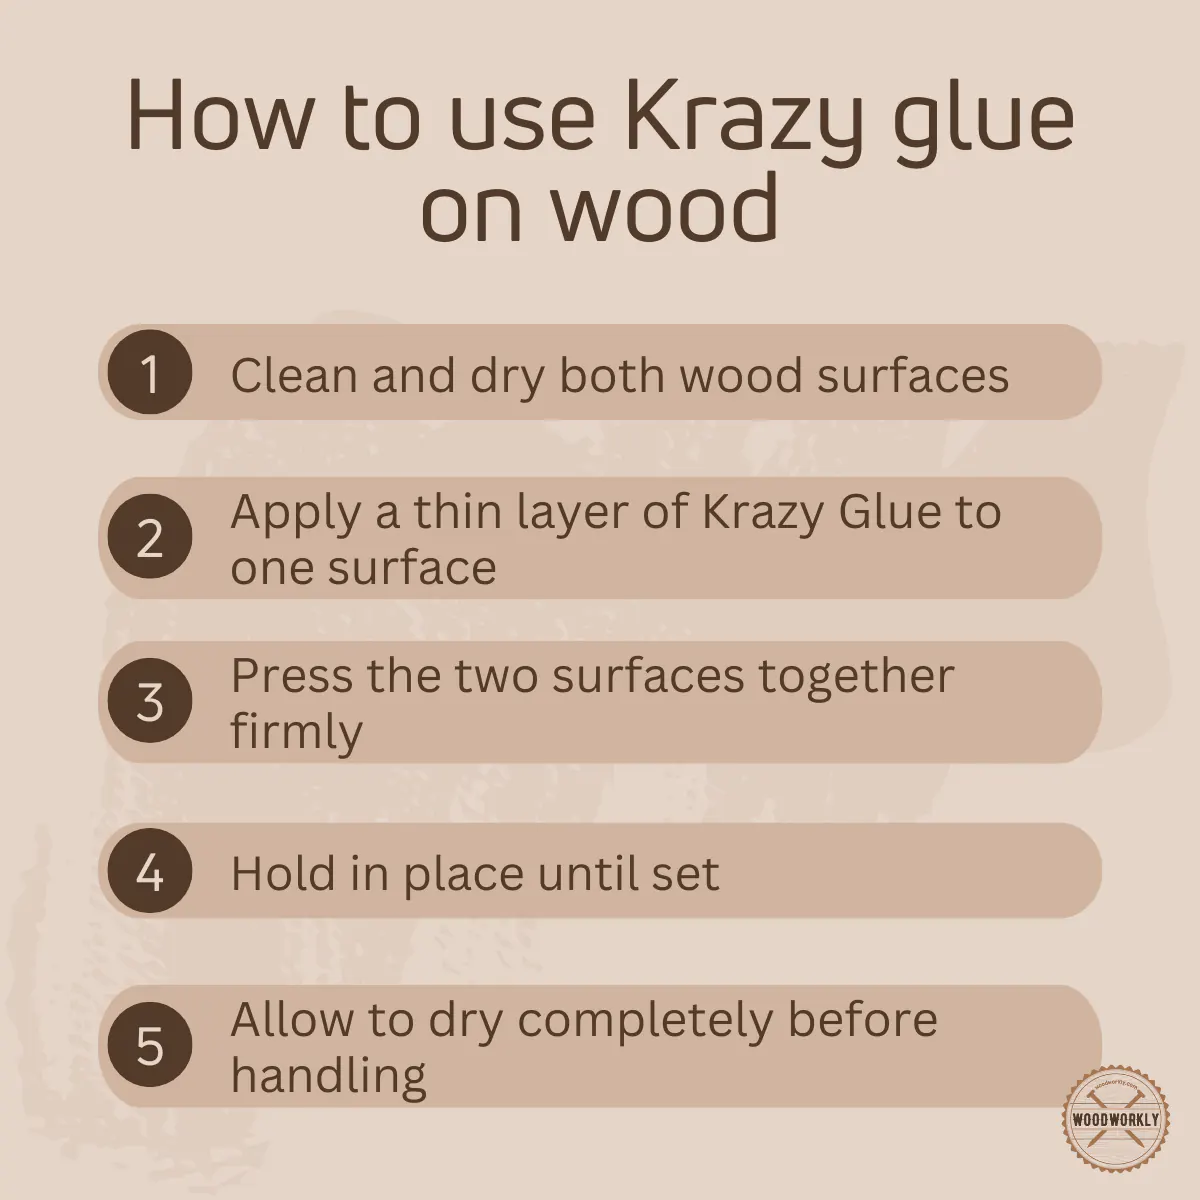 How to use Krazy glue on wood